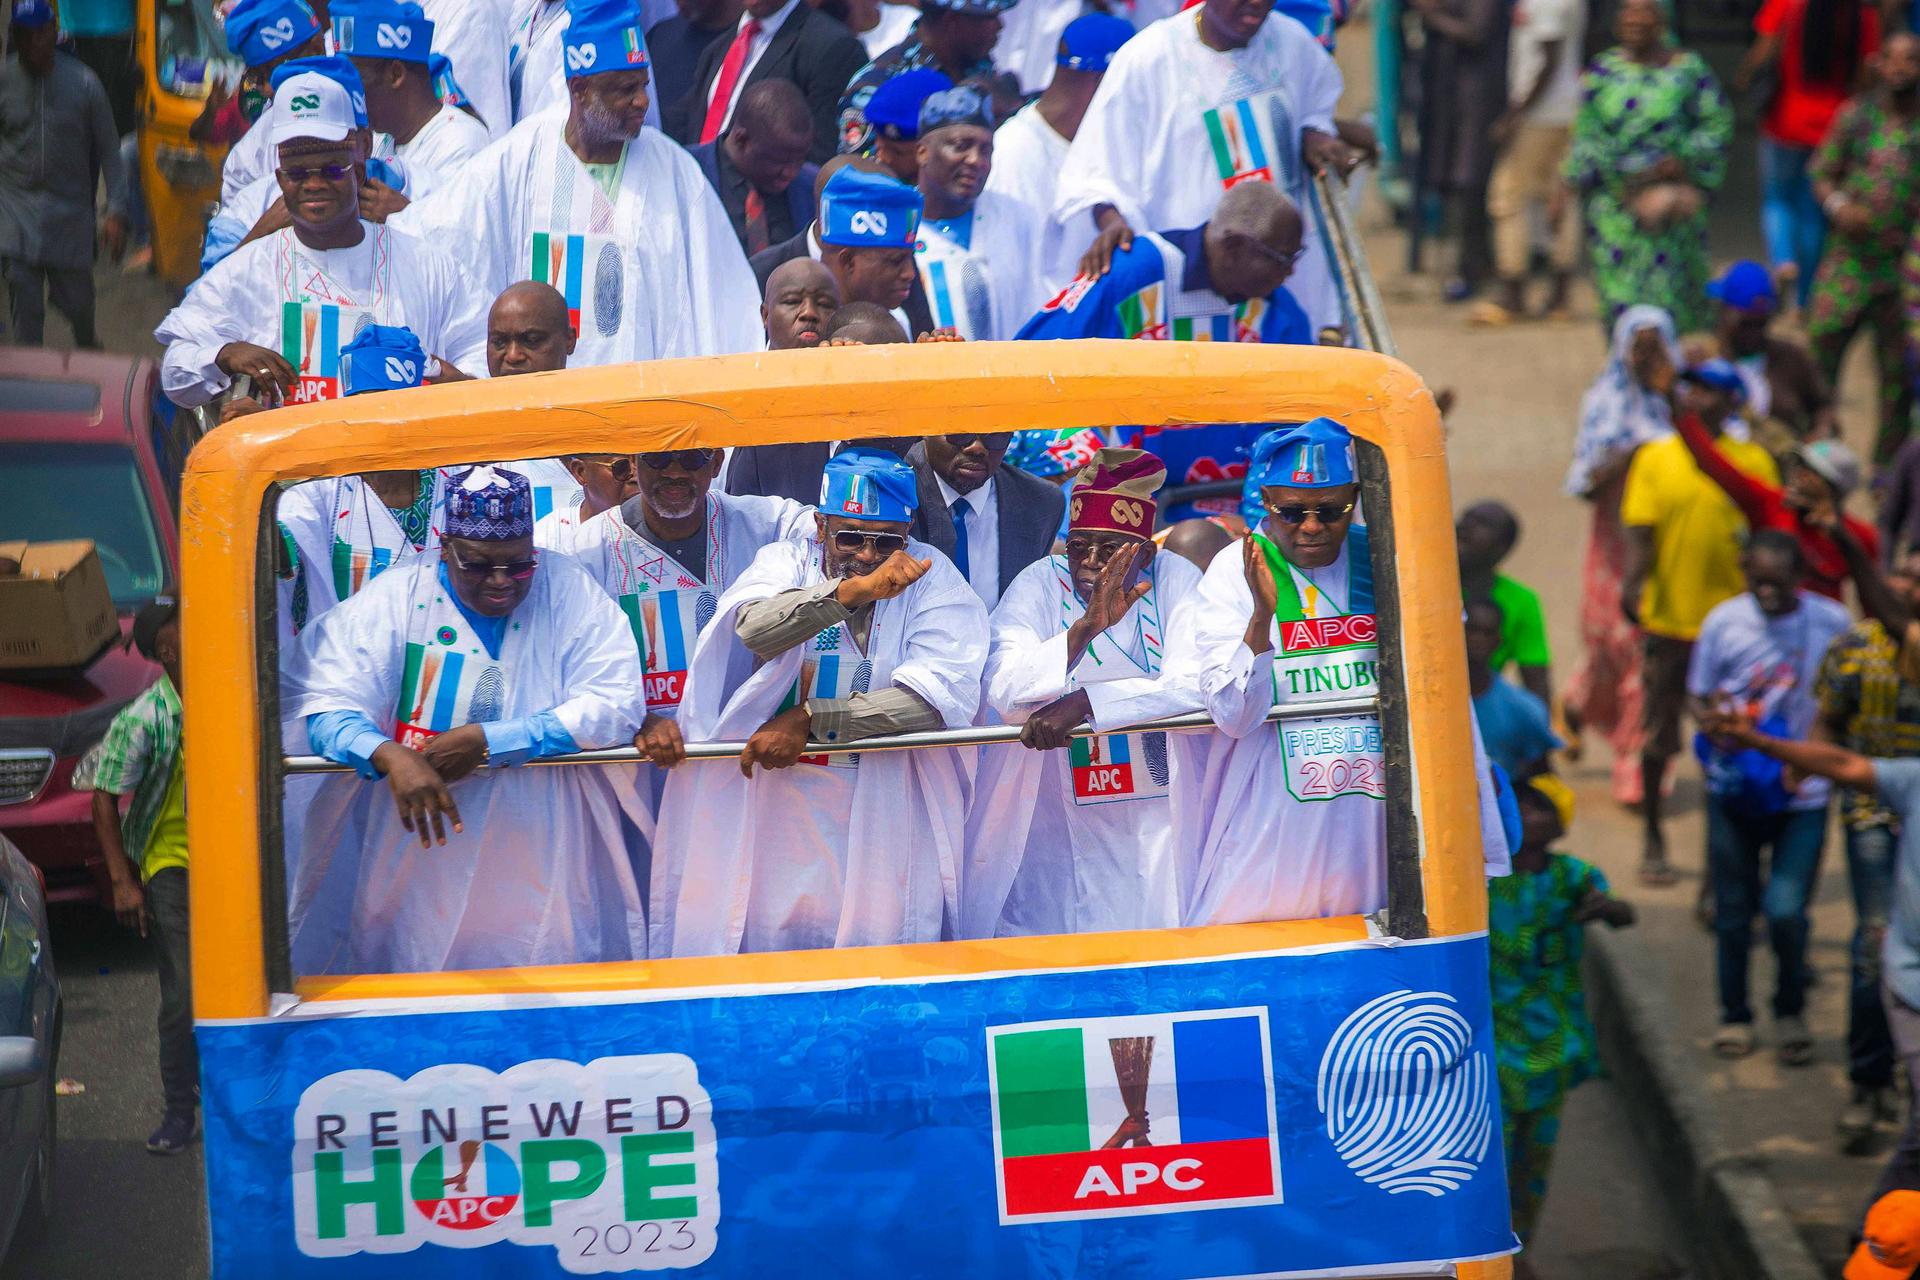 Bola Ahmed Tinubu, foreground right, presidential candidate of the All Progressives Congress, Nigeria ruling party, rides on a double decker bus during an election campaign rally in Lagos, Nigeria, Tuesday, Feb 21, 2023. 